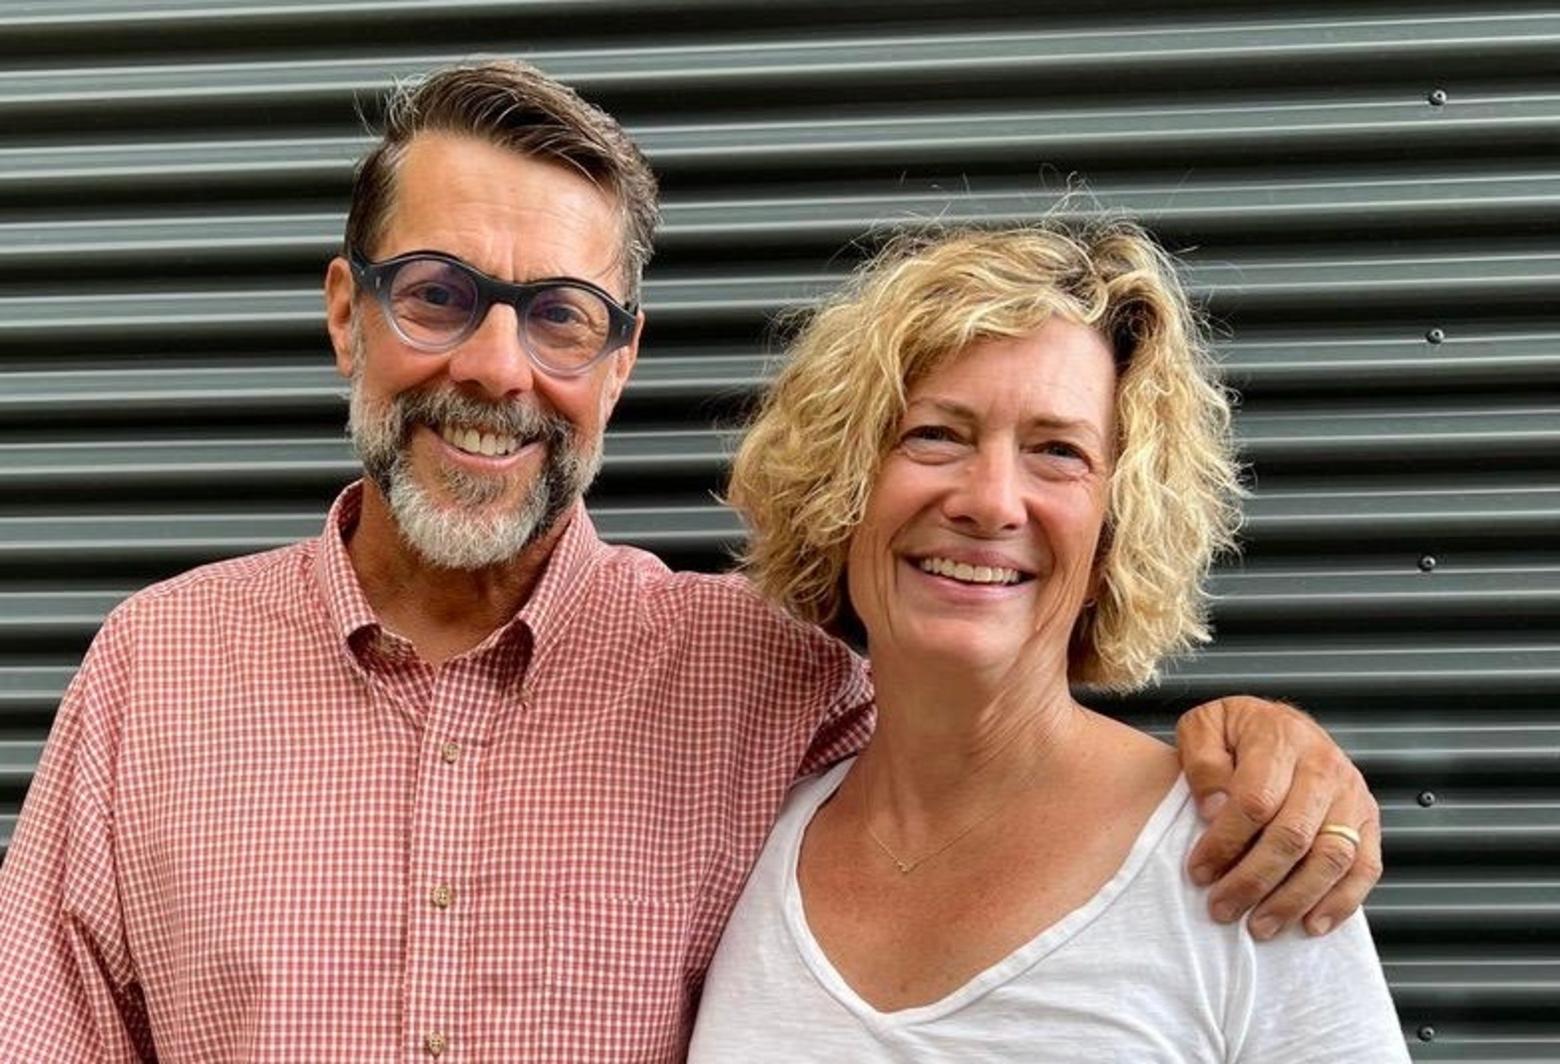 Lori Ryker, at right, founder of the "wildlifes" public art initiative, and its first artist in residence, Eric Junker, widely known for producing pop-up wildlife-related street art throughout Los Angeles. Photo courtesy Lori Ryker